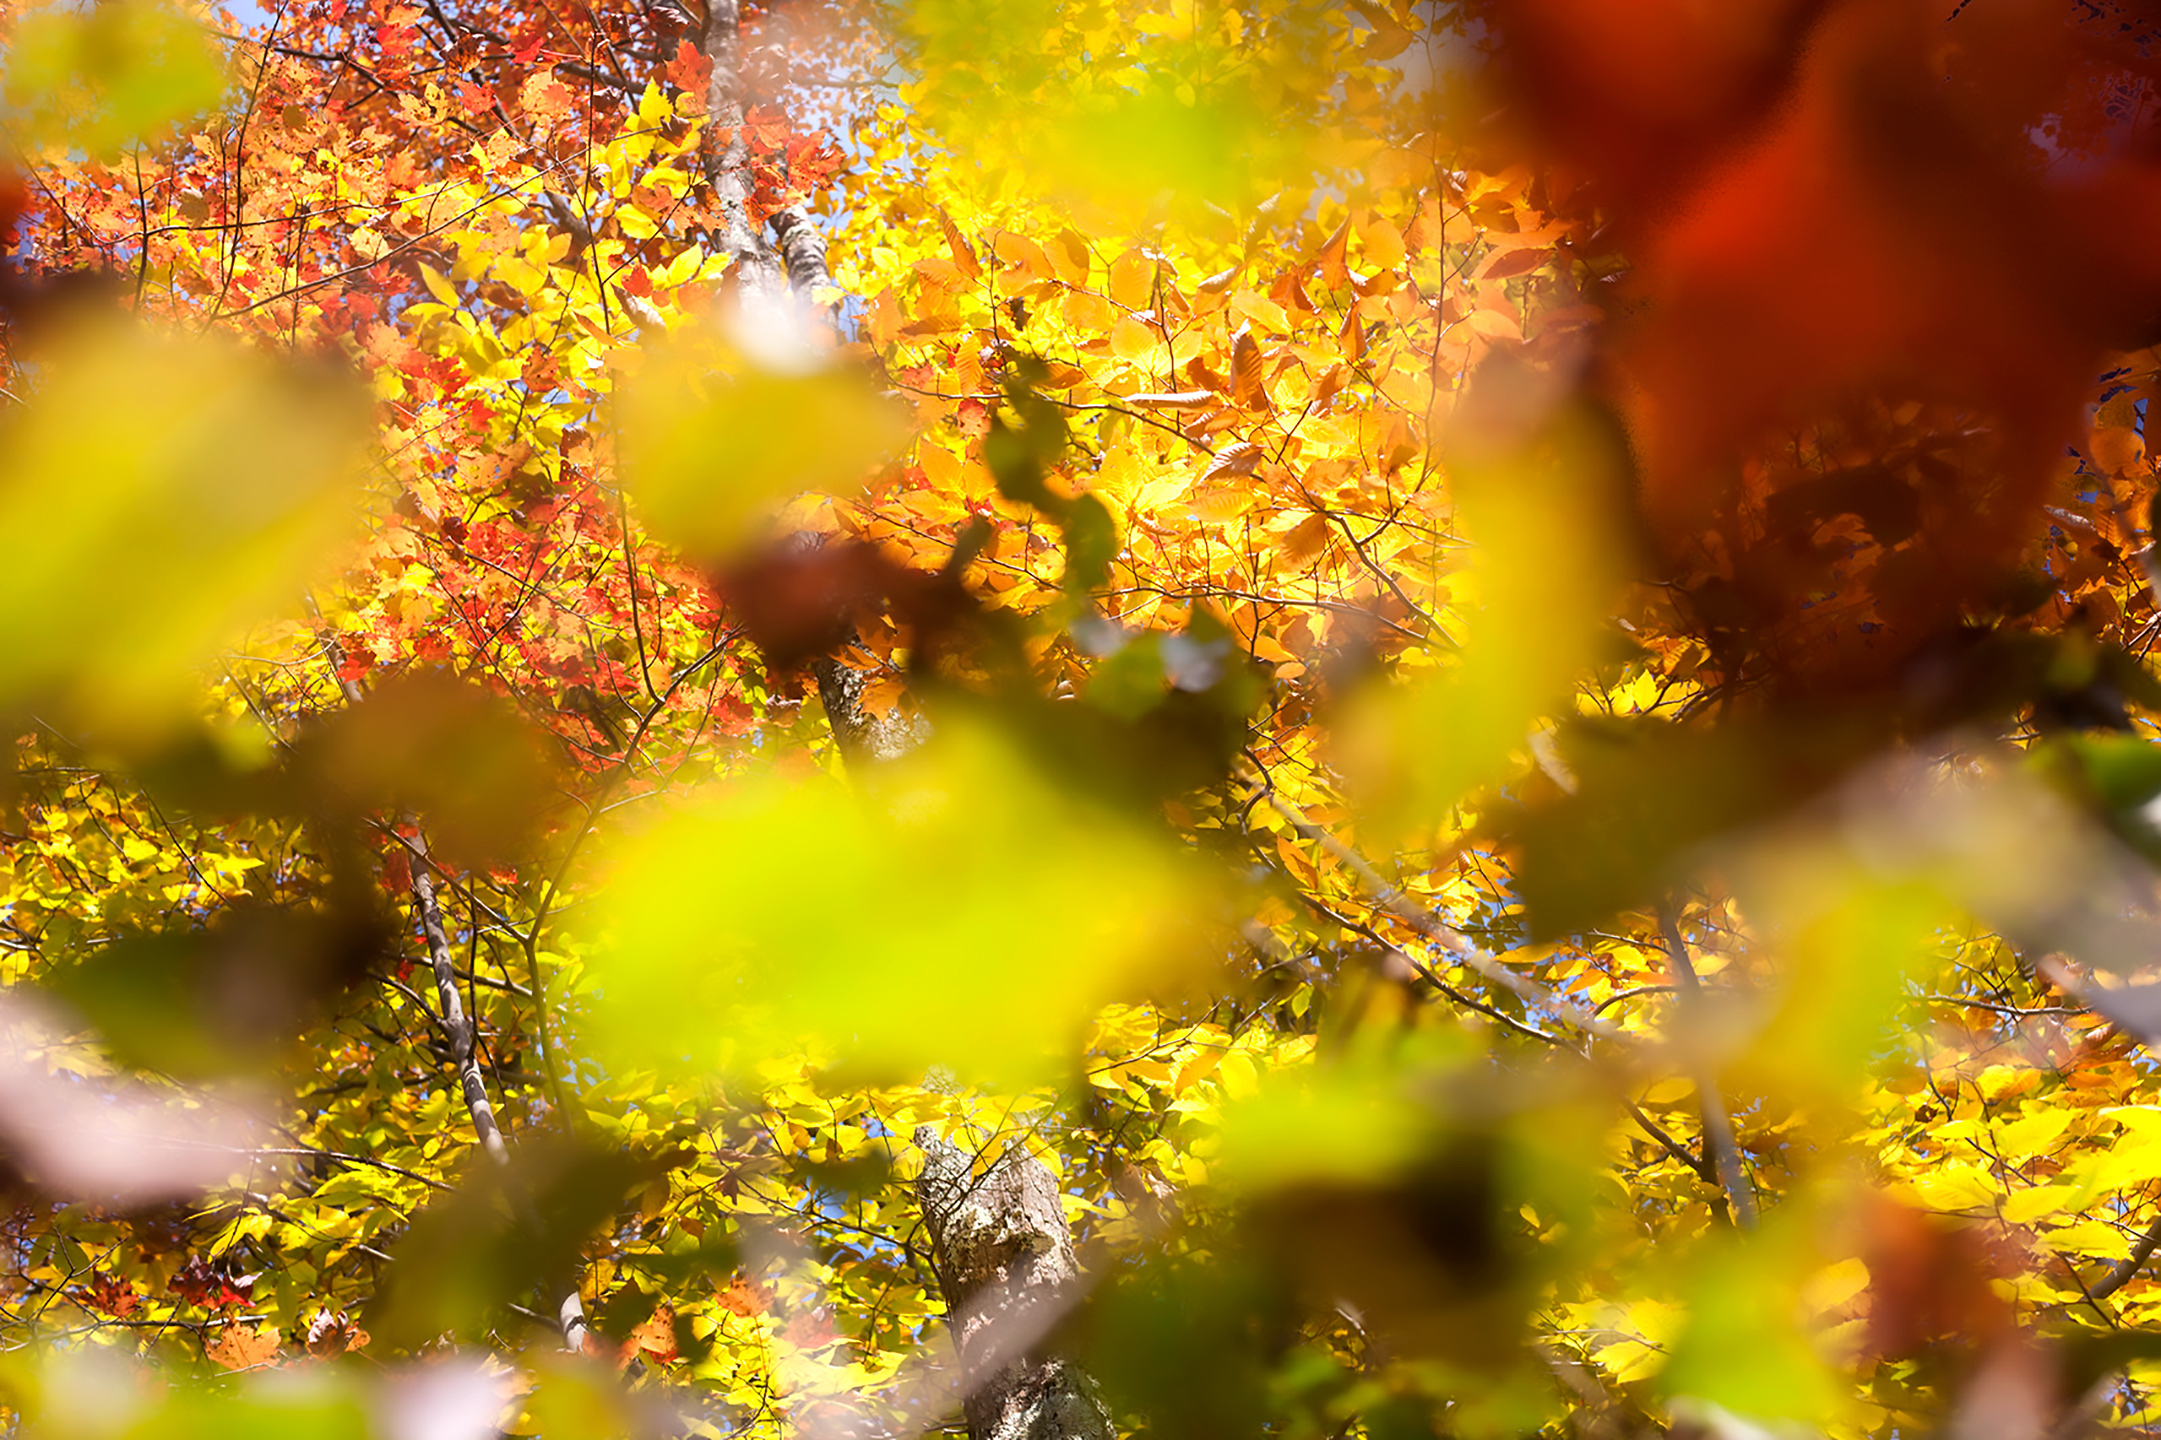 Abstract image looking through the woods on a fall day.